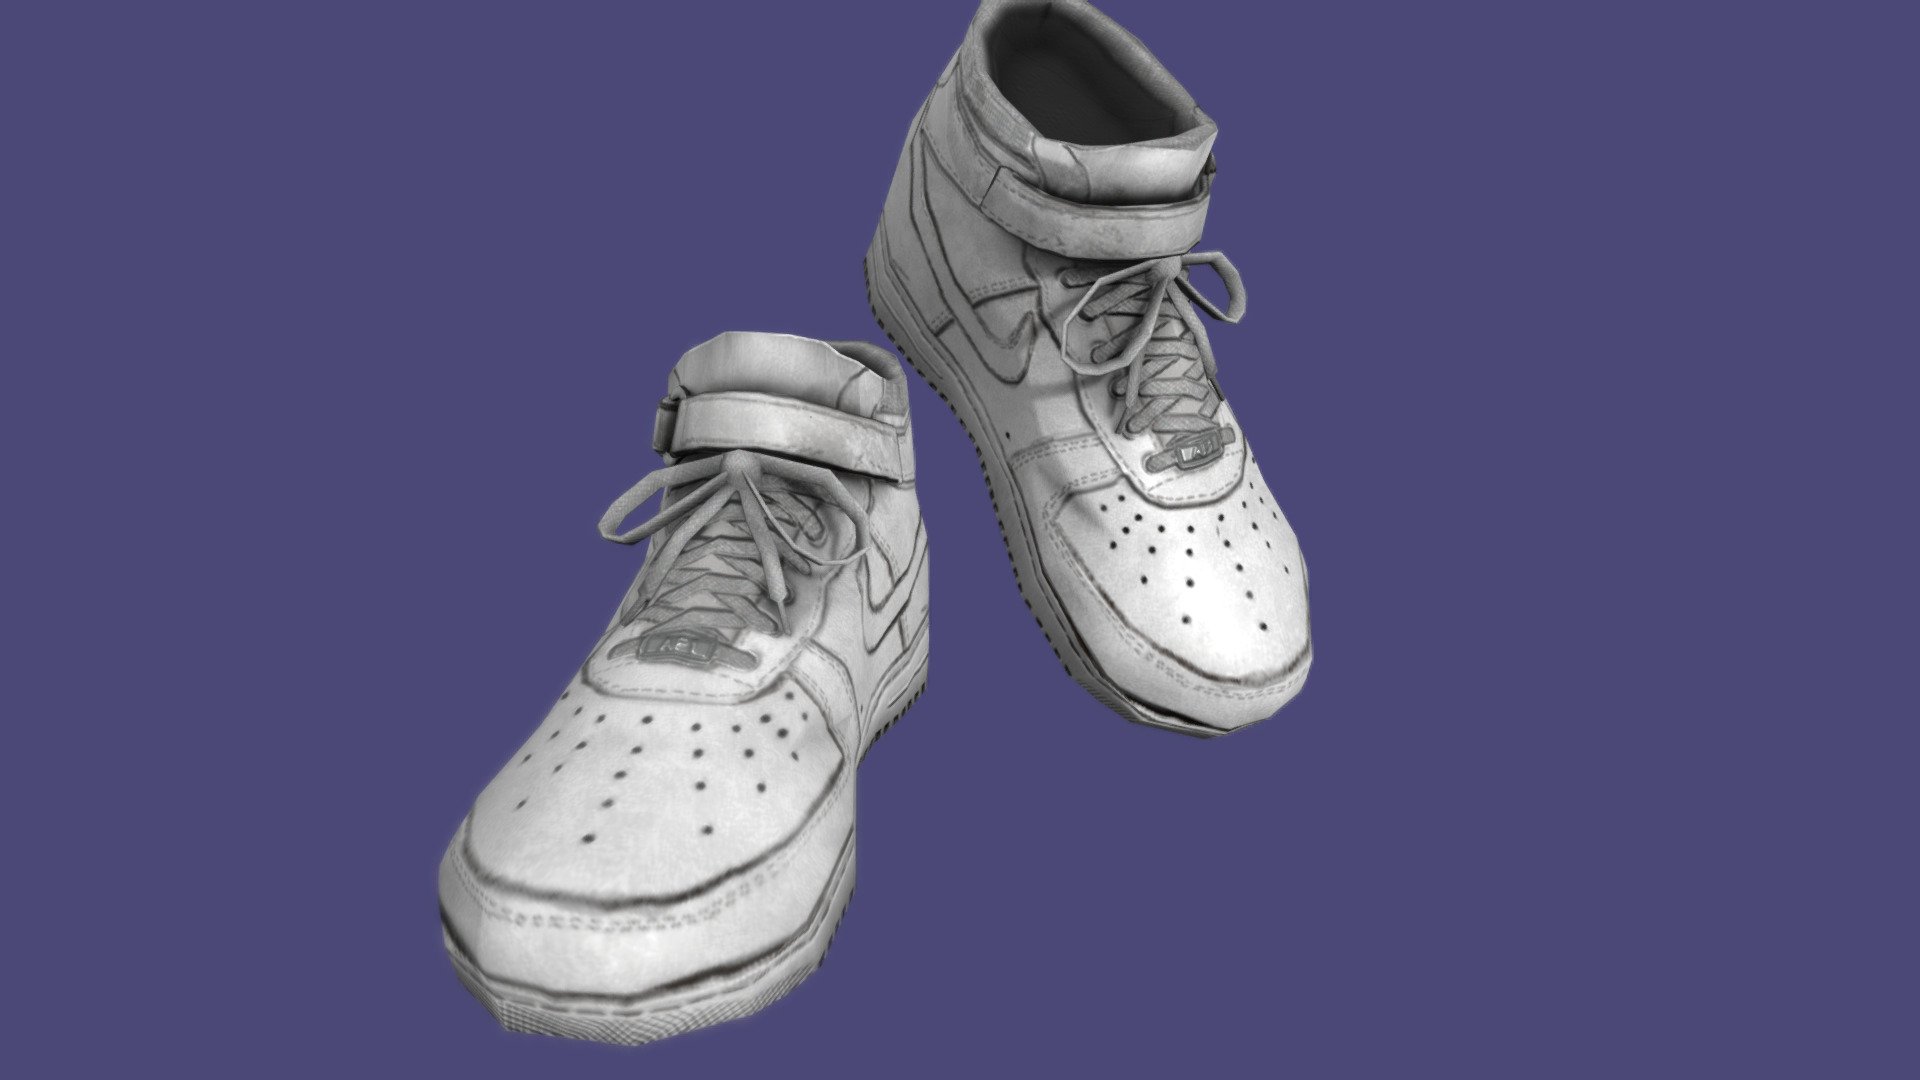 Nike AF1 Sneakers, made to be part of outfits and ensembles.

As with many of my recent models, made heavy use of heightmap painting in Substance Painter, allowing for a relatively clean and low-poly mesh, excellent for use with character outfits. 

On purchase, includes 6 texture sets (high/low top, white,dirty,black) and 2 pairs of pre-exported FBX files for high and low tops, as well as the source .Blend file for further modifications. Originally created using PBR spec/gloss, but PBR met/rough textures are also included.

Modelled in Blender, textured in Substance Painter, additional processing in Substance Designer and Photoshop 3d model